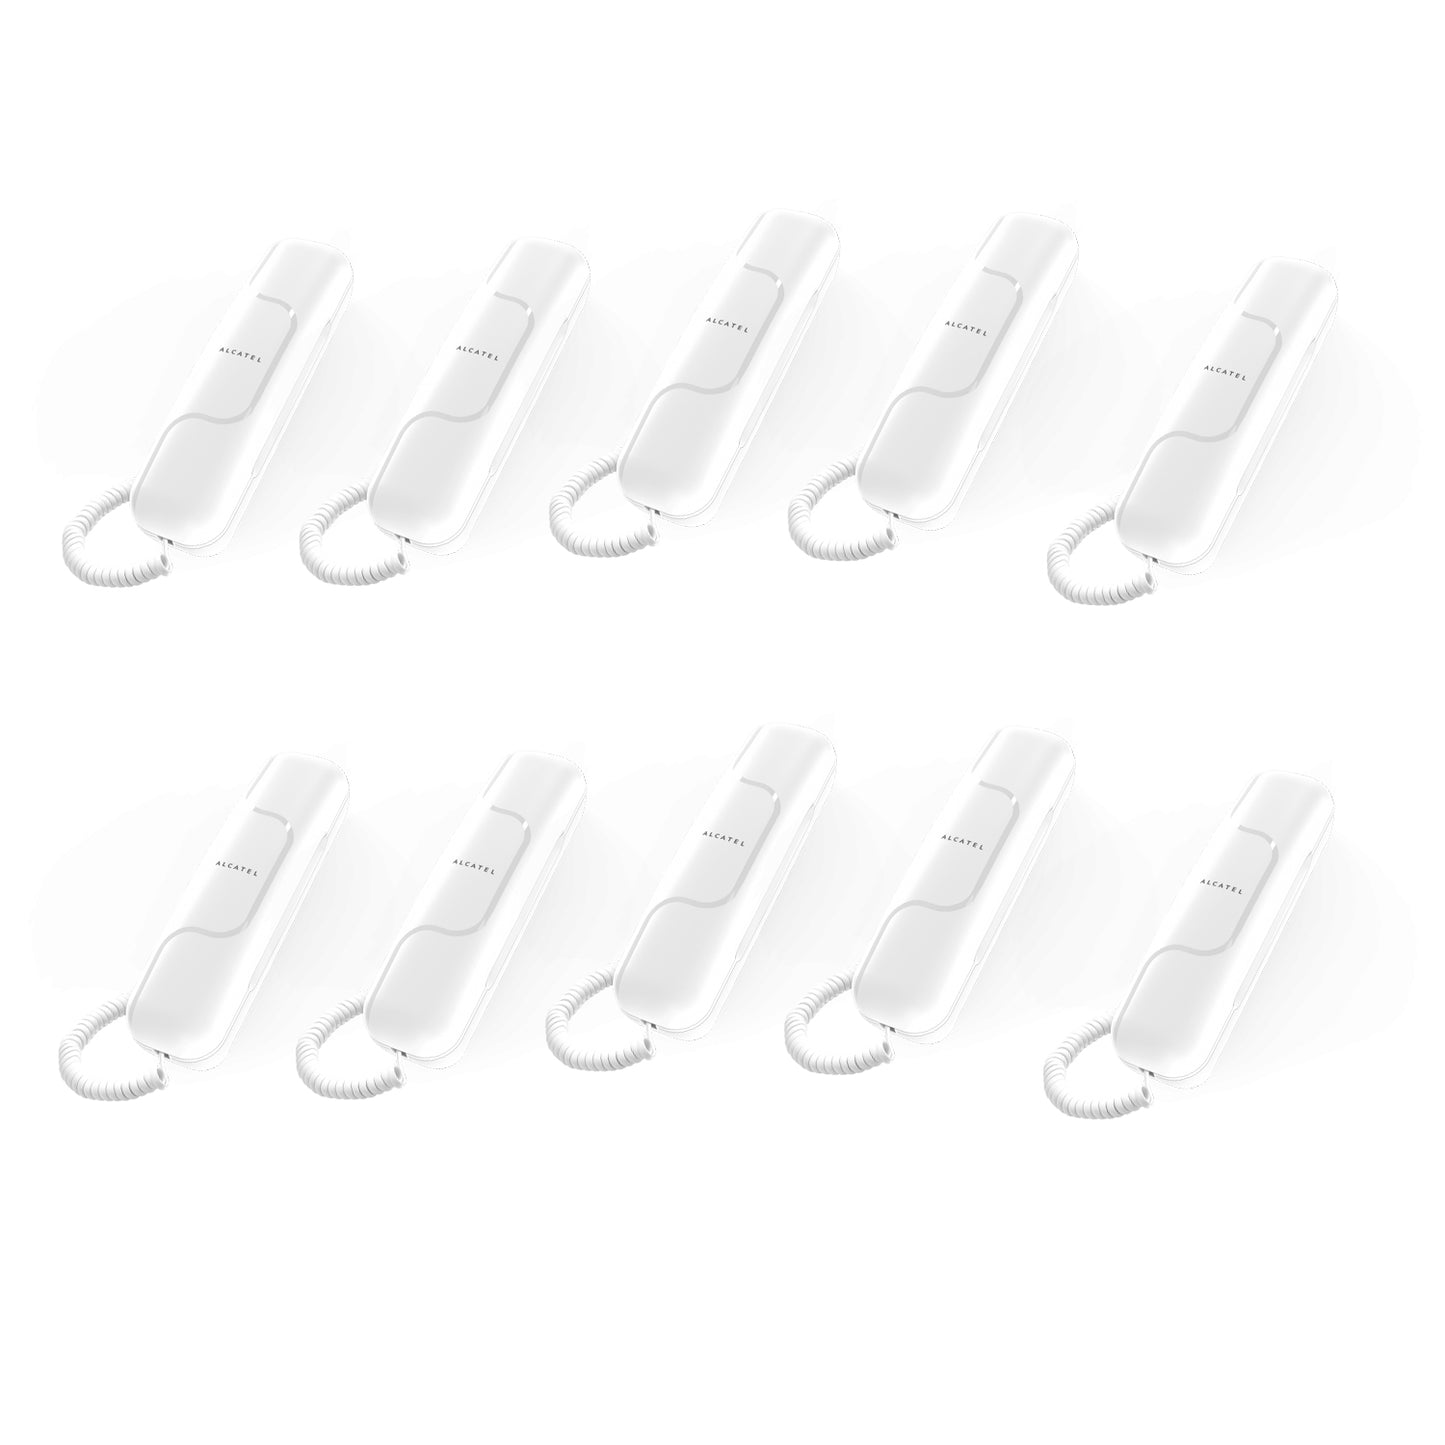 Alcatel T06 Wall Mount Corded Landline Phone White (Pack Of 10)